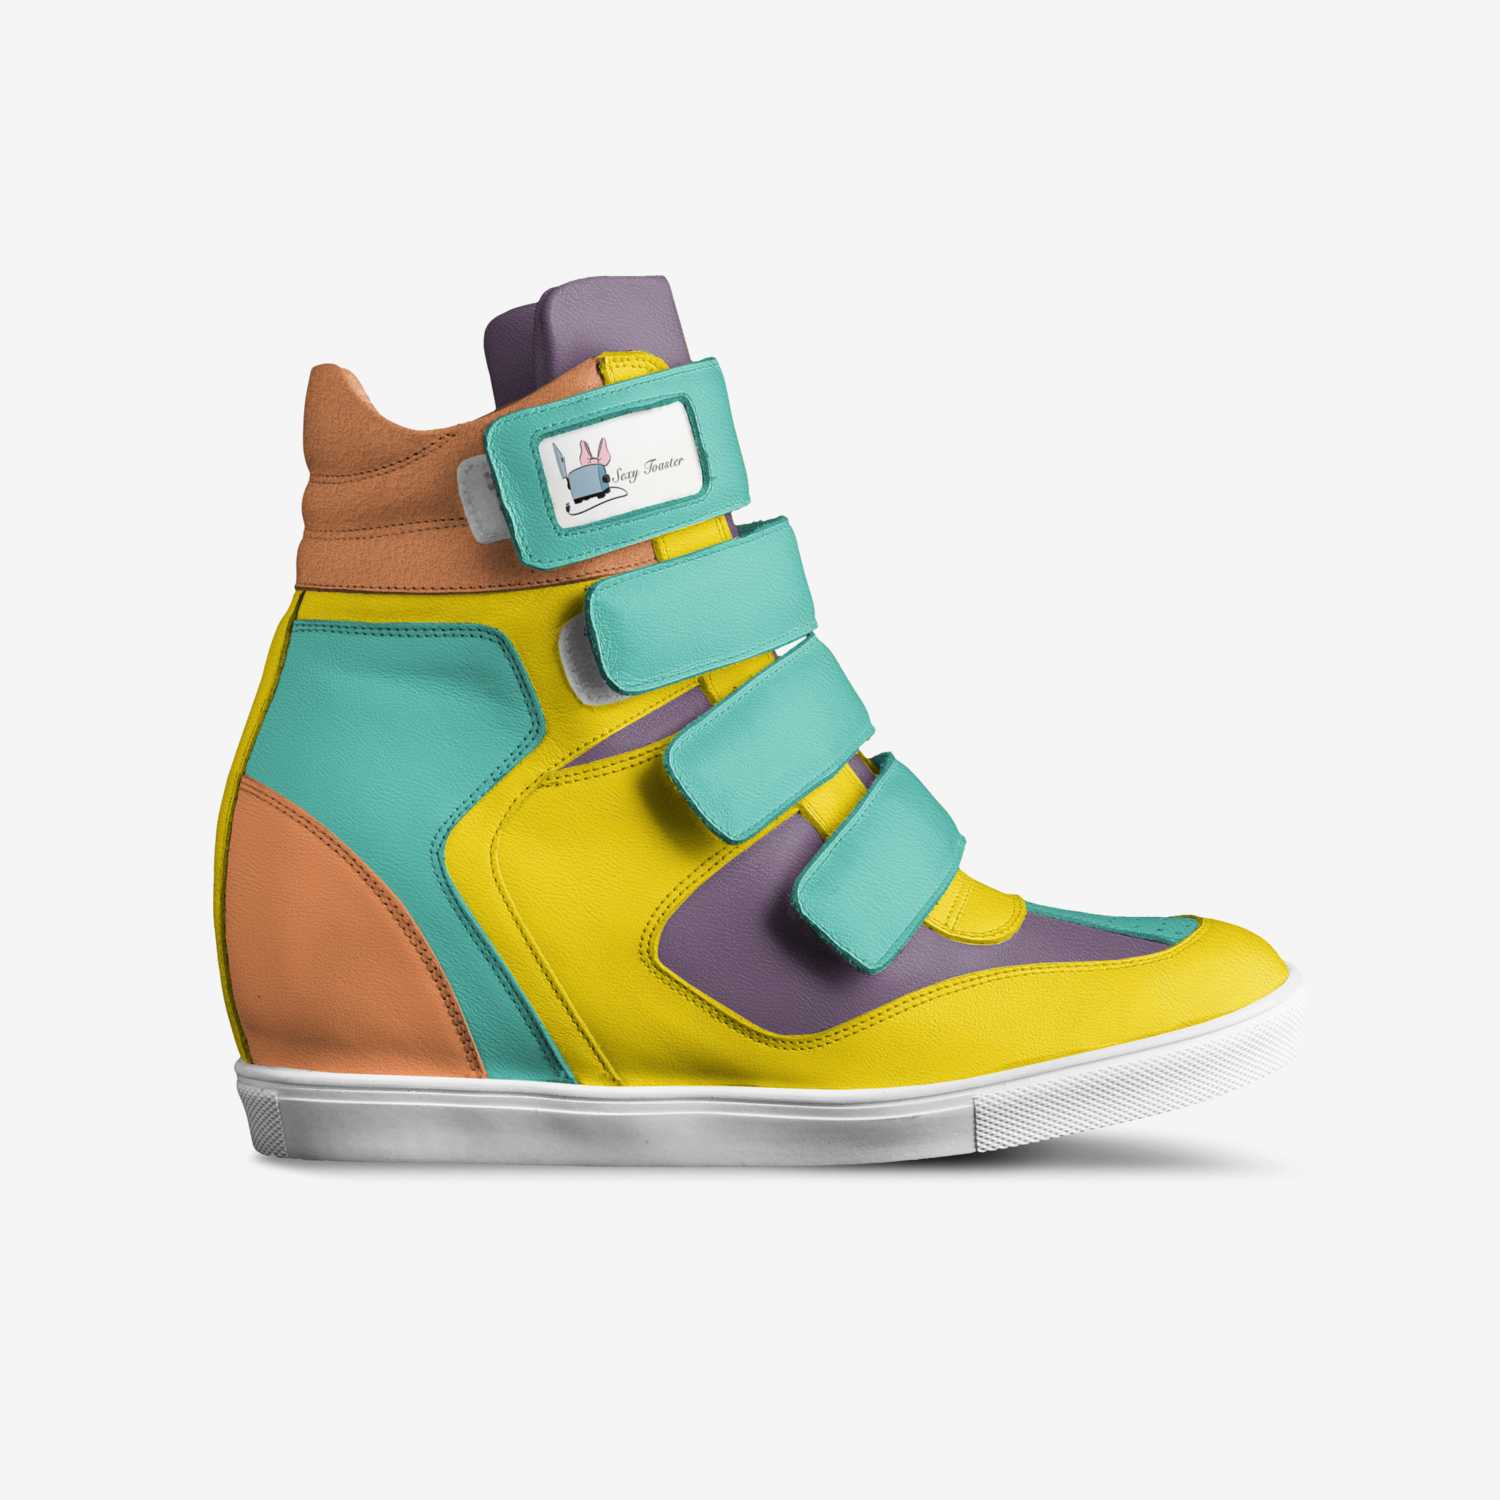 Sexy Toaster | A Custom Shoe concept by Caitlin Touchton